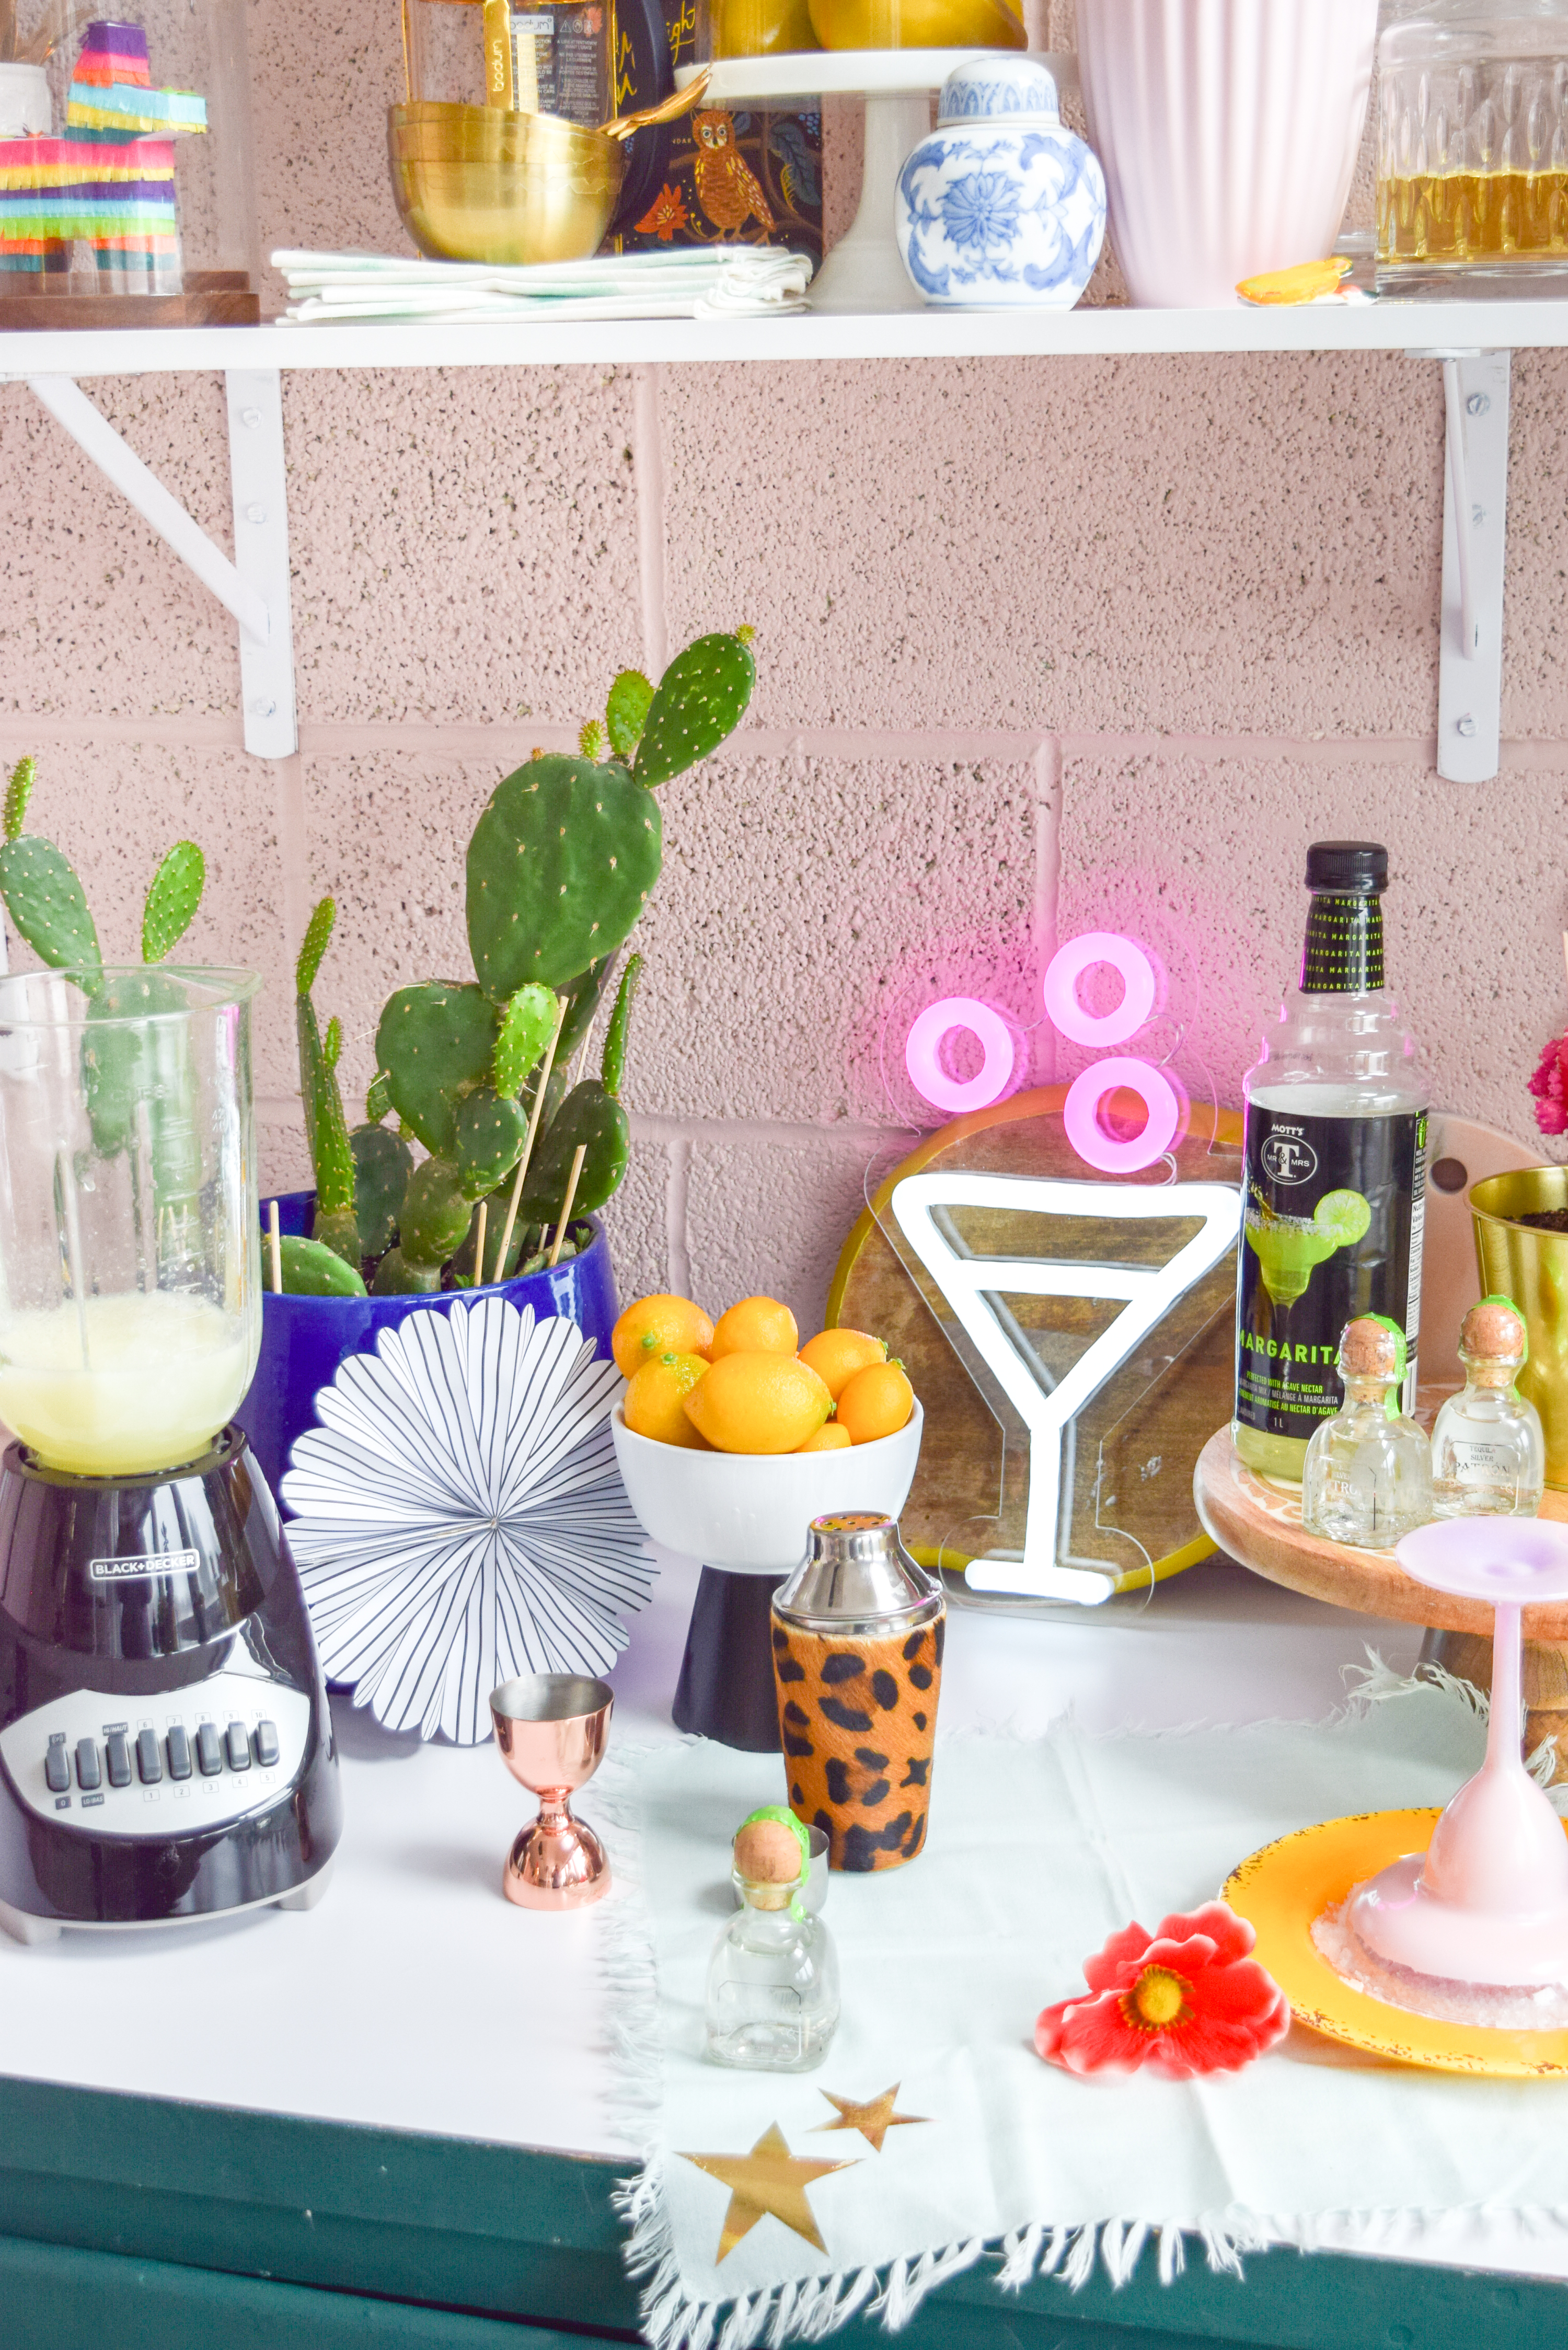 A Cinco de Mayo Party - from start to finish - to help you get the party started! Come see what I made and bought, for this colourful fiesta. Hint: lots of mini pinatas, colourful paper picado, and cocktails. Now, where's my margarita?